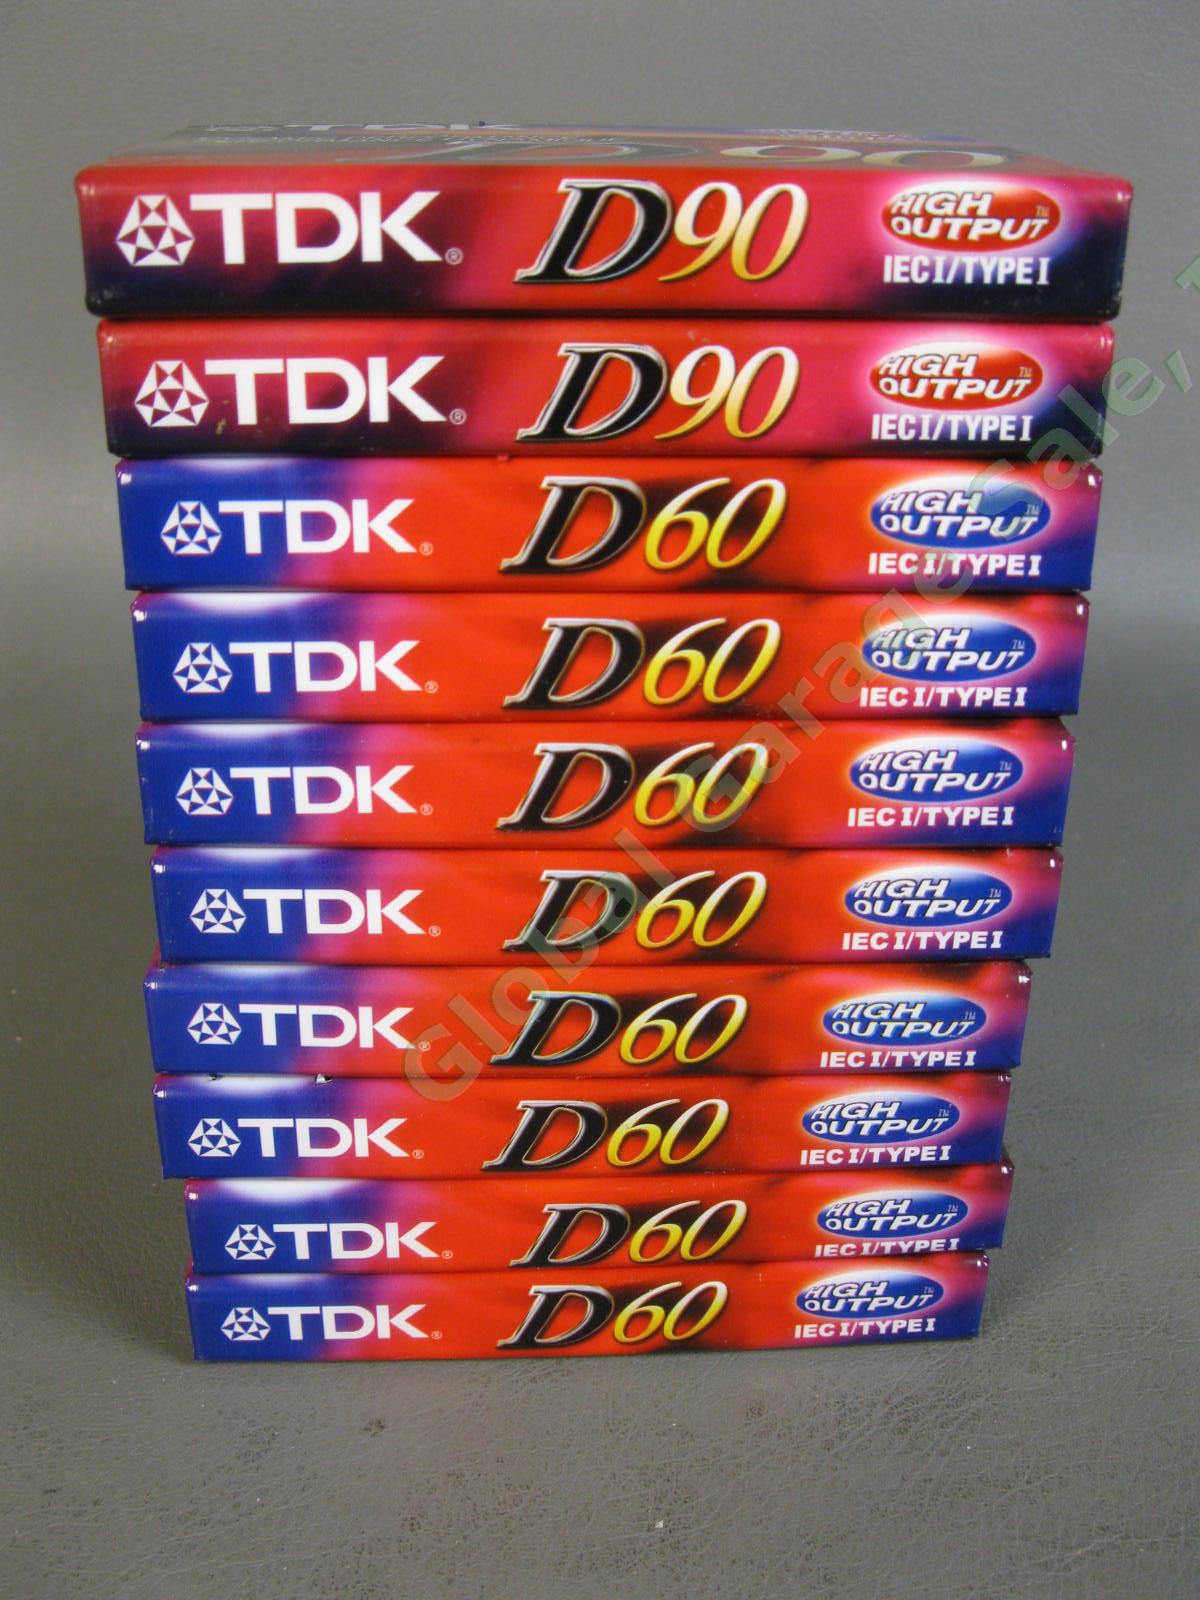 LOT of 10 SEALED 8 TDK D60 2 D90 High Output IEC Type I Audio Cassette Tapes NR